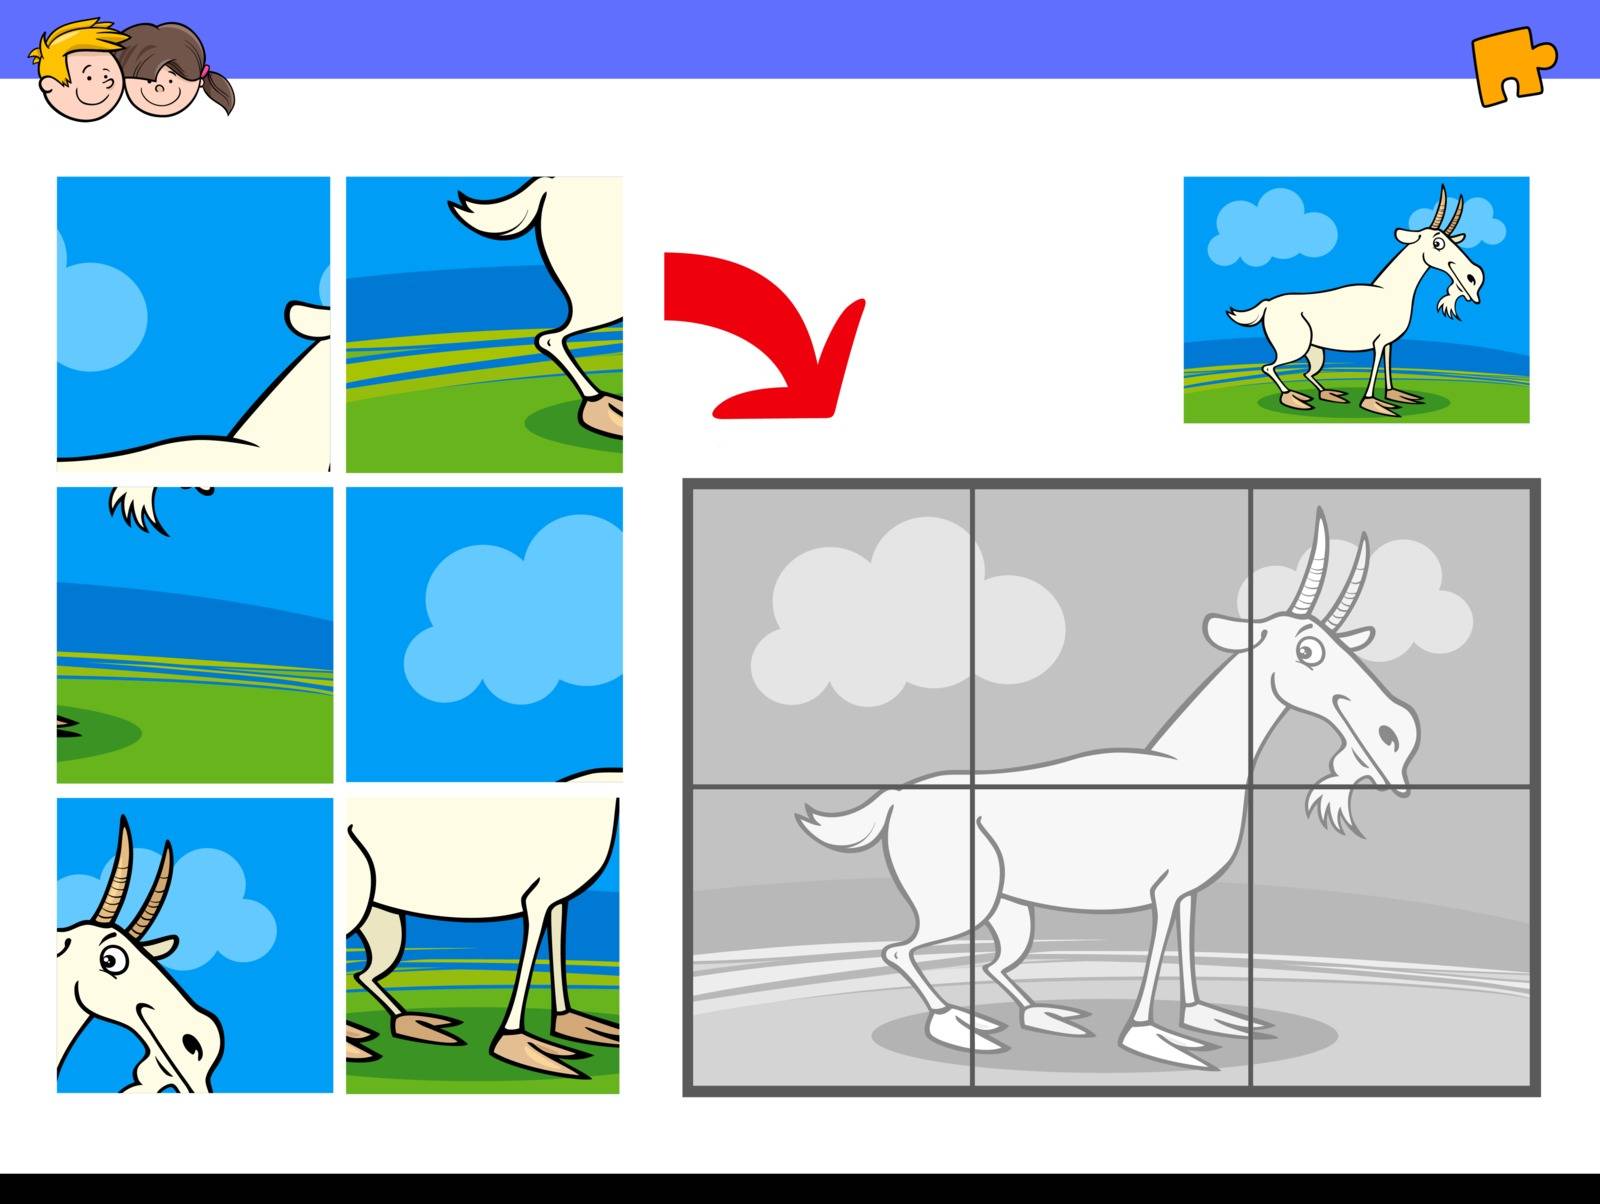 Cartoon Illustration of Educational Jigsaw Puzzle Activity Game for Children with Goat Farm Animal Character